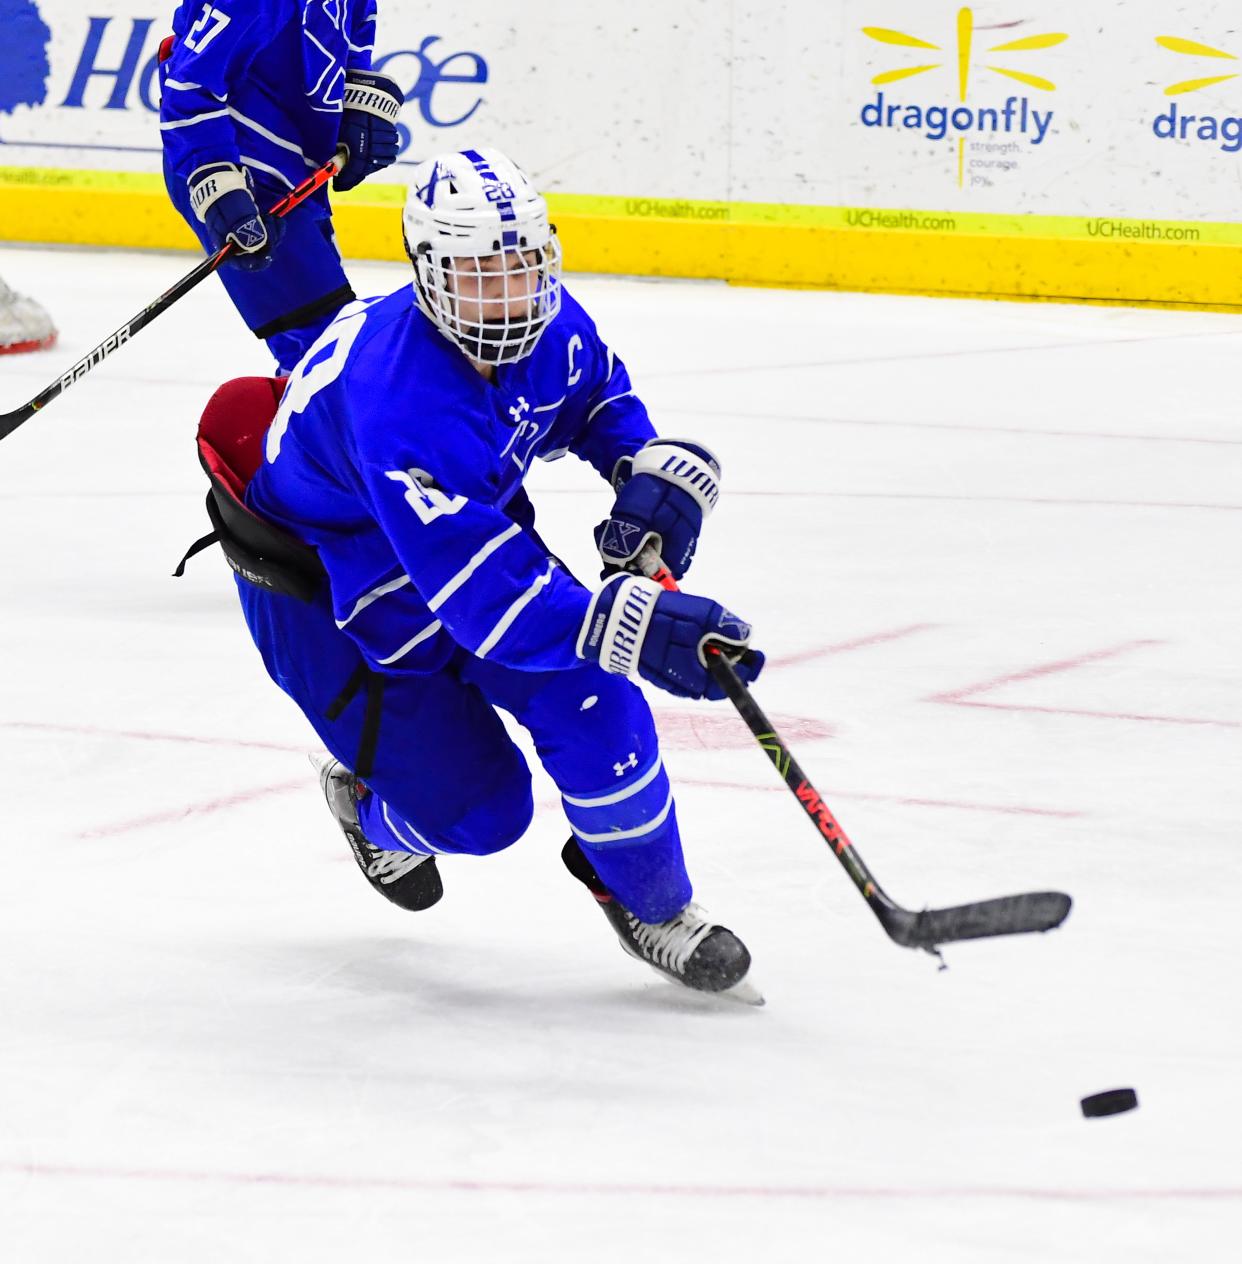 Matthew Langenderfer, the reigning Cincinnati Enquirer Ice Hockey Player of the Year, returns for a strong St. Xavier team.